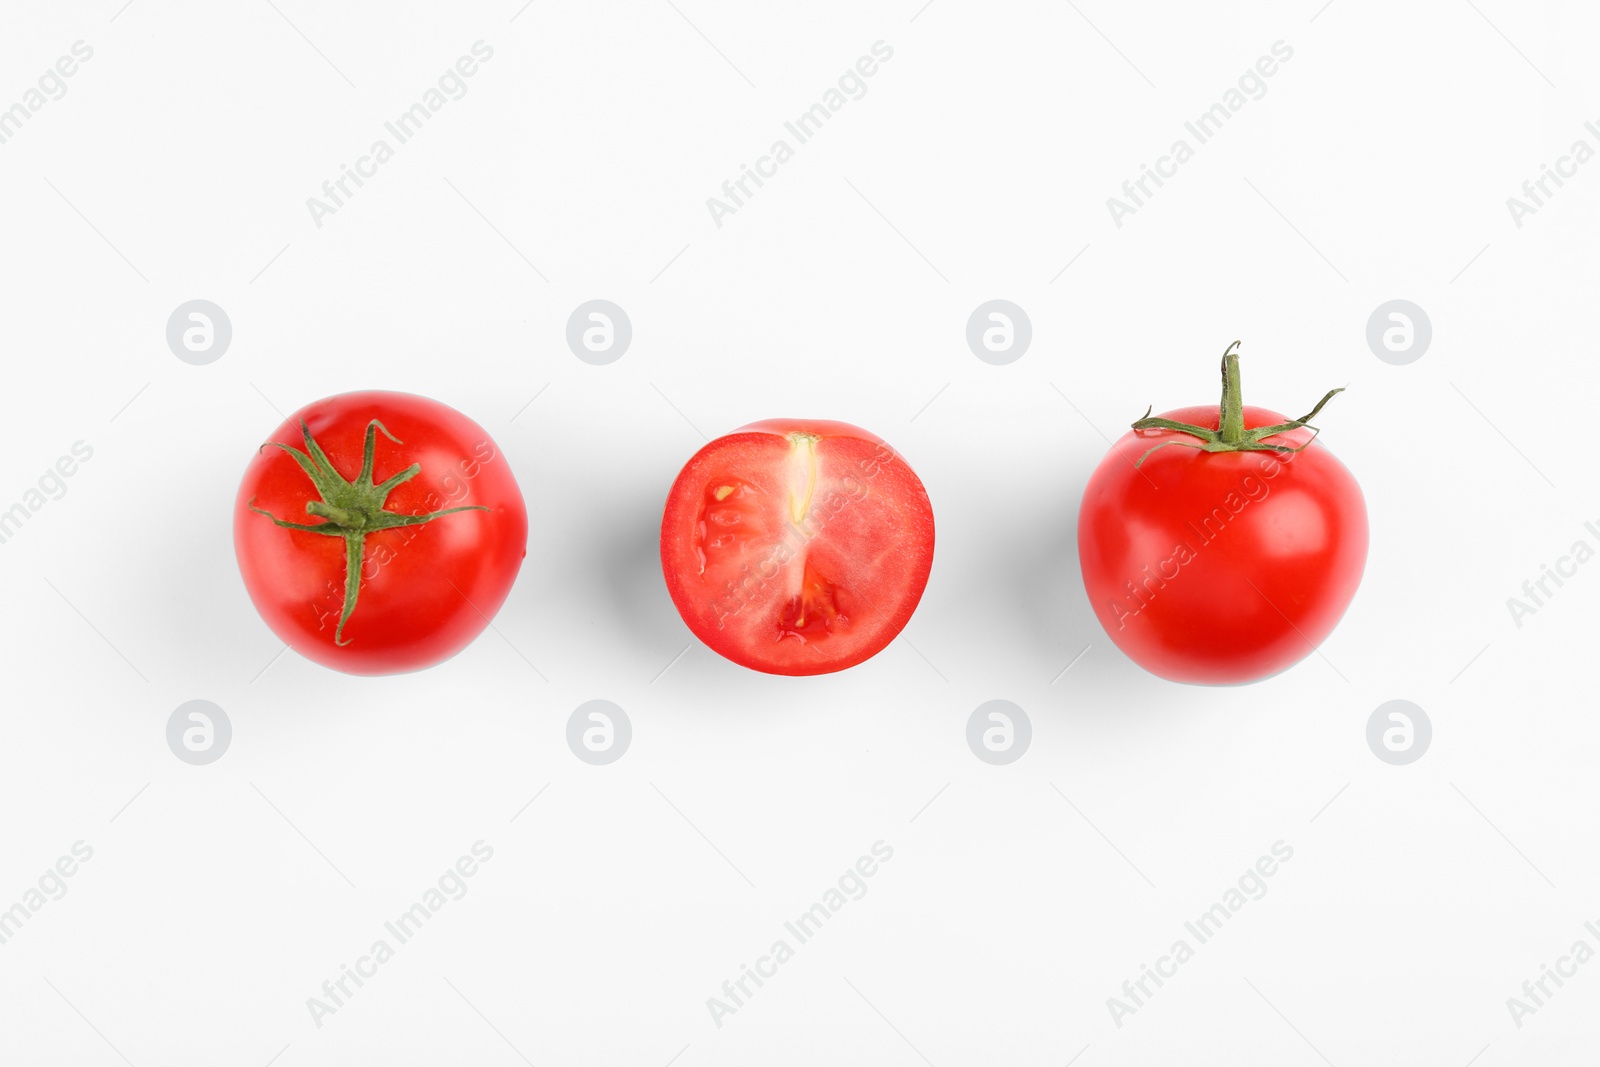 Photo of Whole and ripe red tomatoes on white background, top view